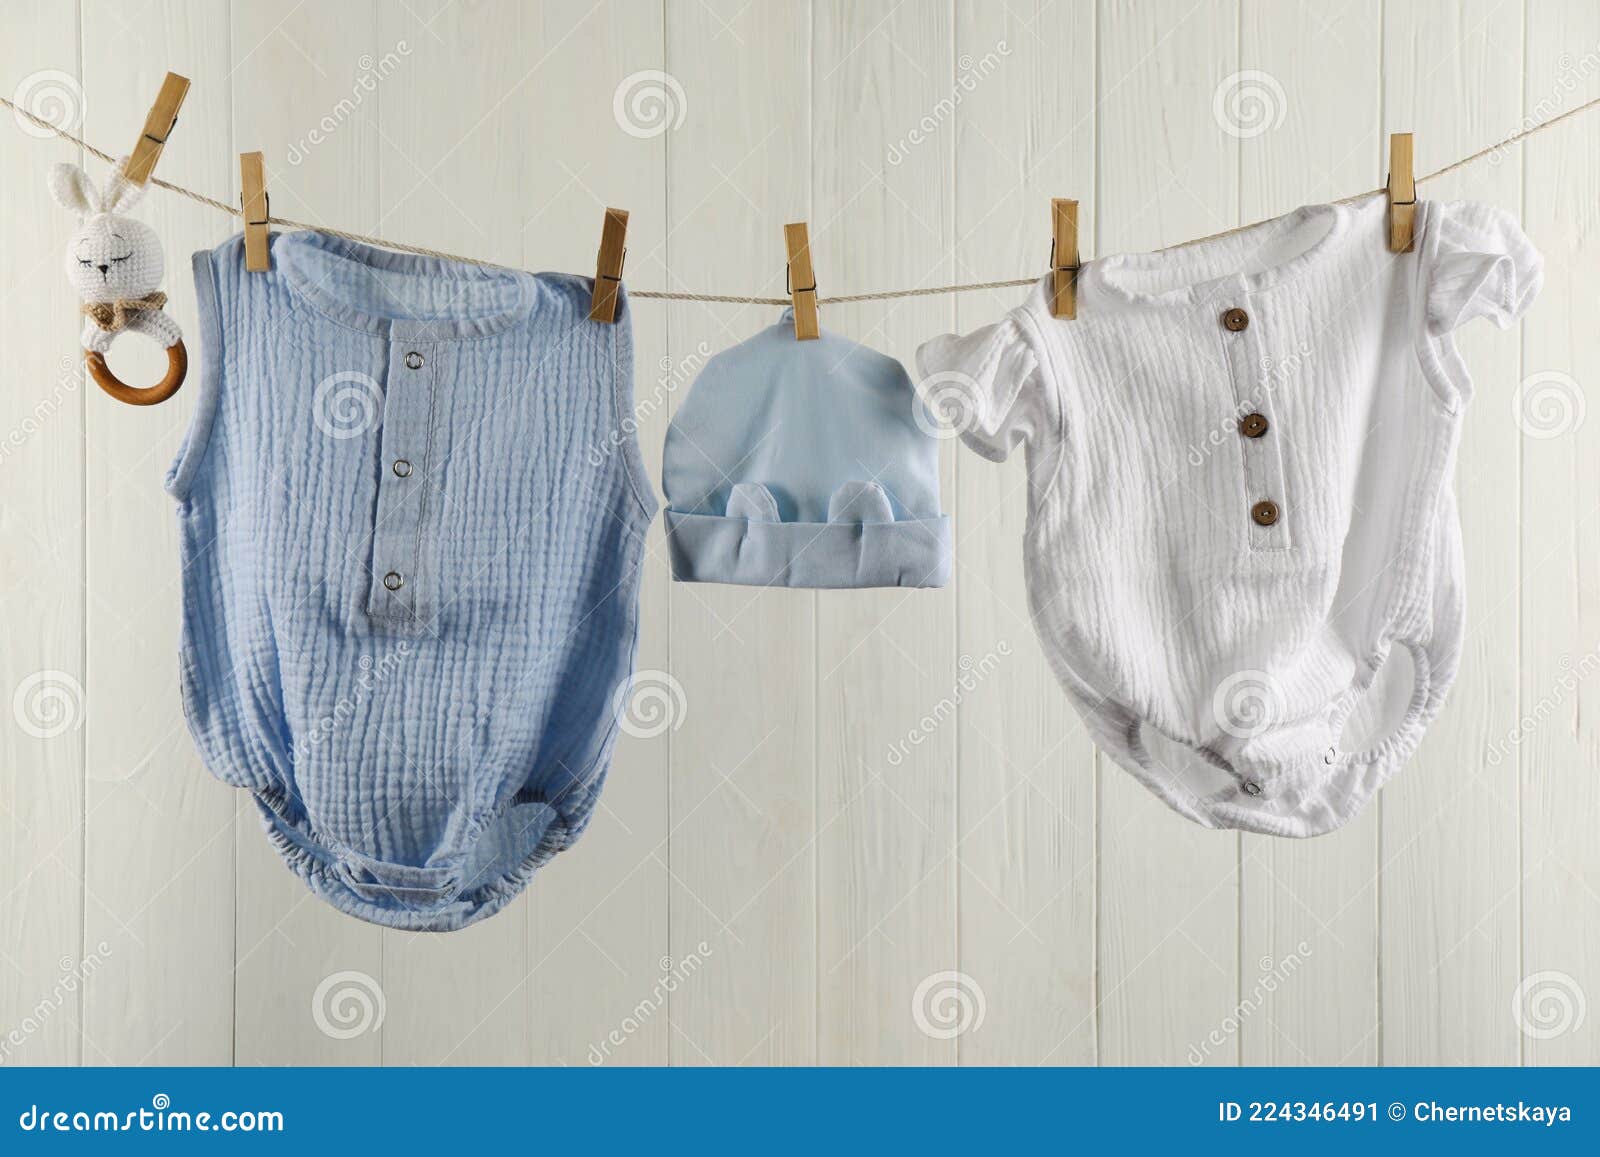 Baby Clothes and Accessories Hanging on Washing Line Near White Wall ...